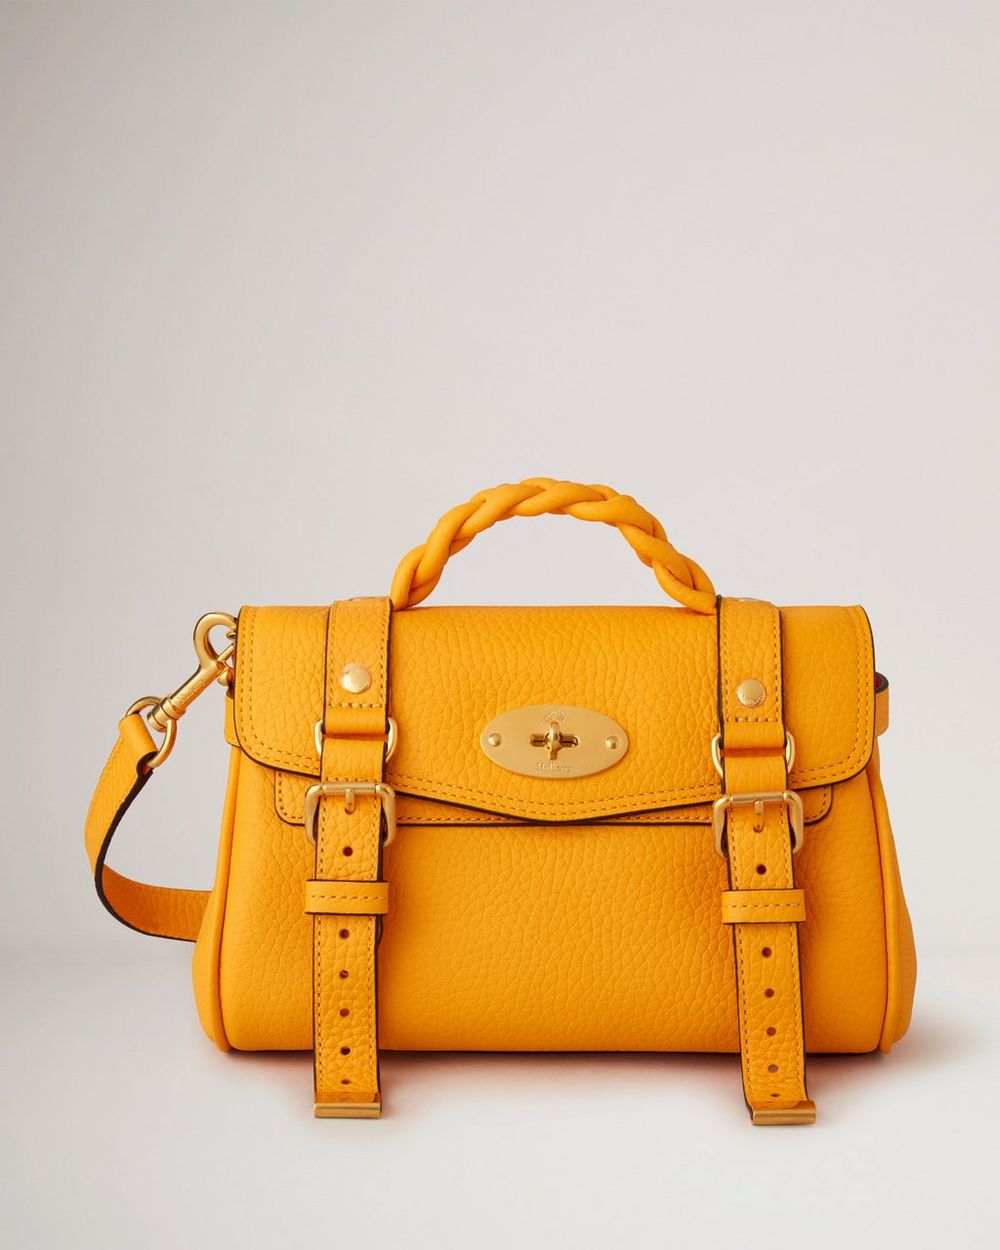 Calling All Noughties It-Girls: The Mulberry Alexa Bag Is Back